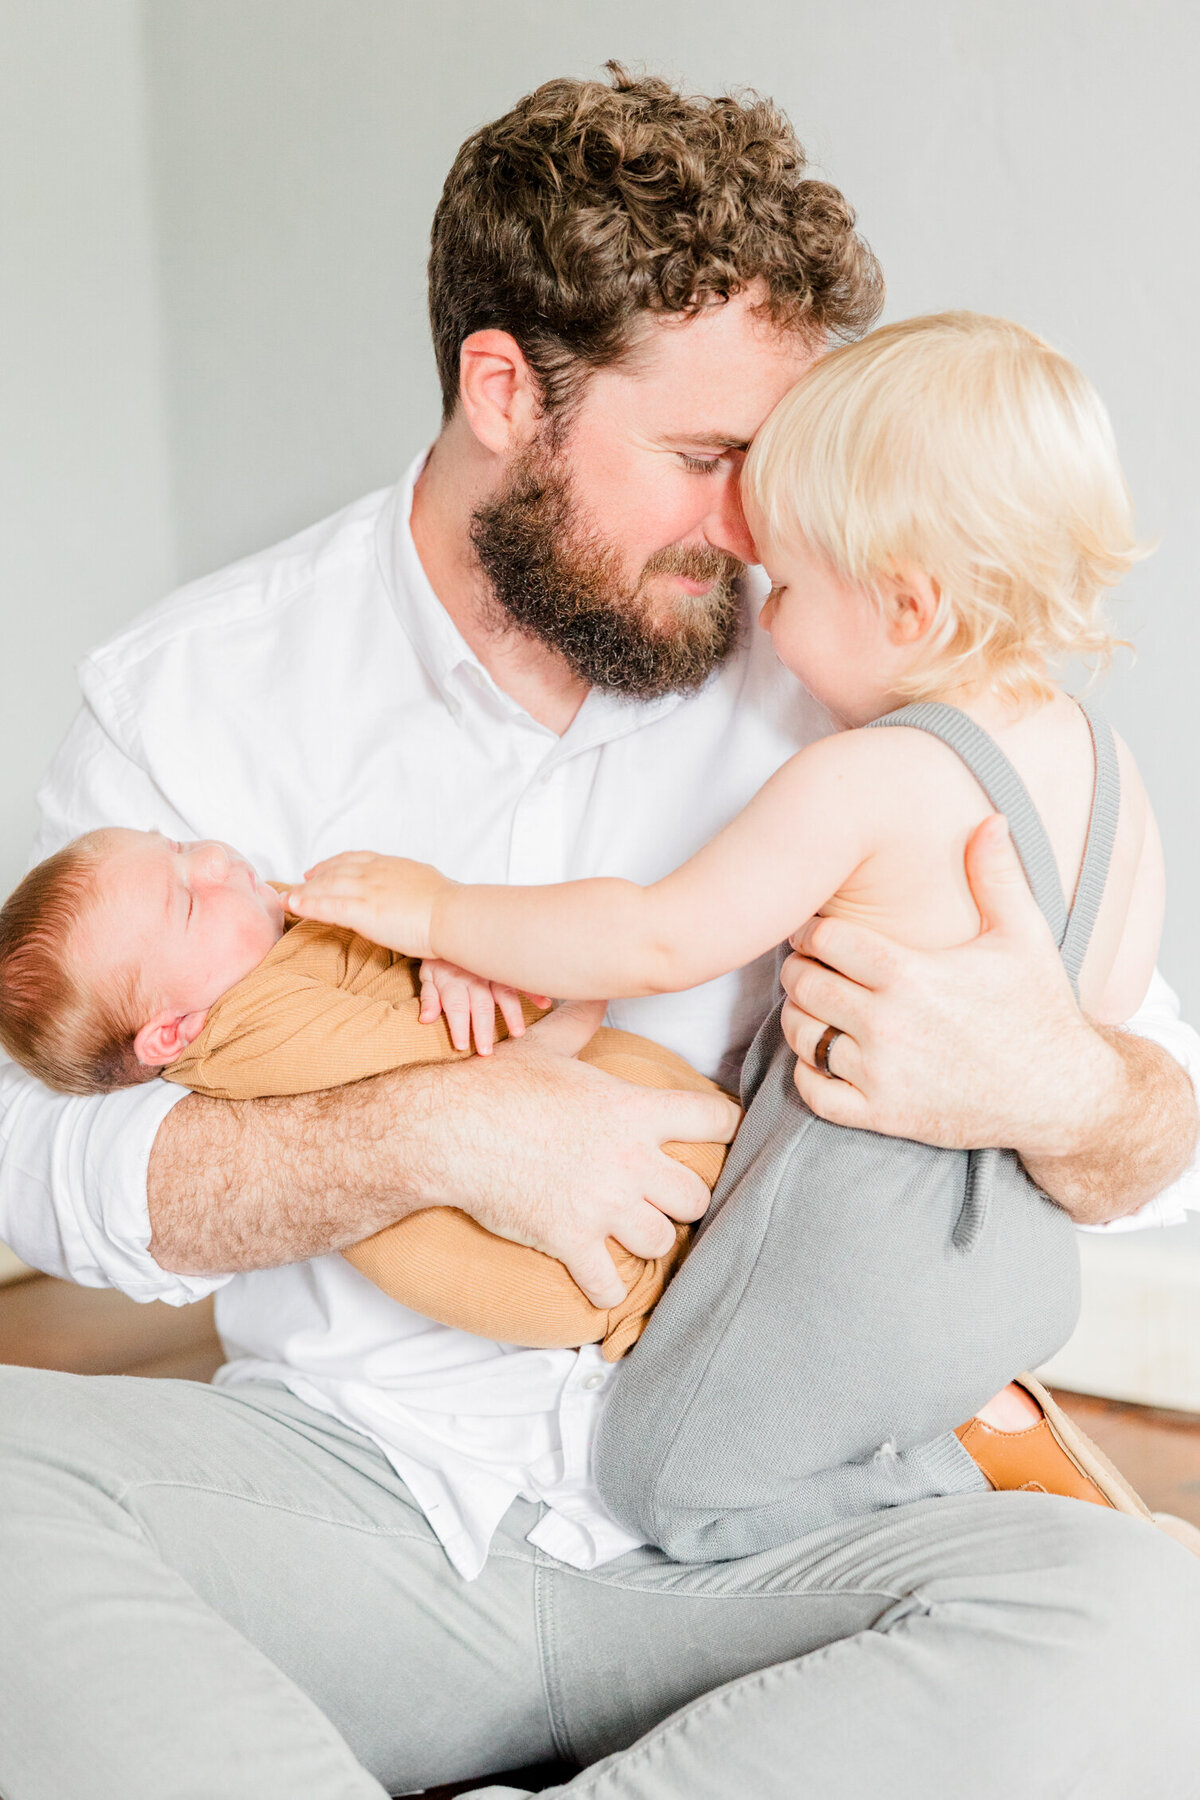 Dad sitting holding baby and toddler in his lap, cuddling toddler while toddler touches newborn